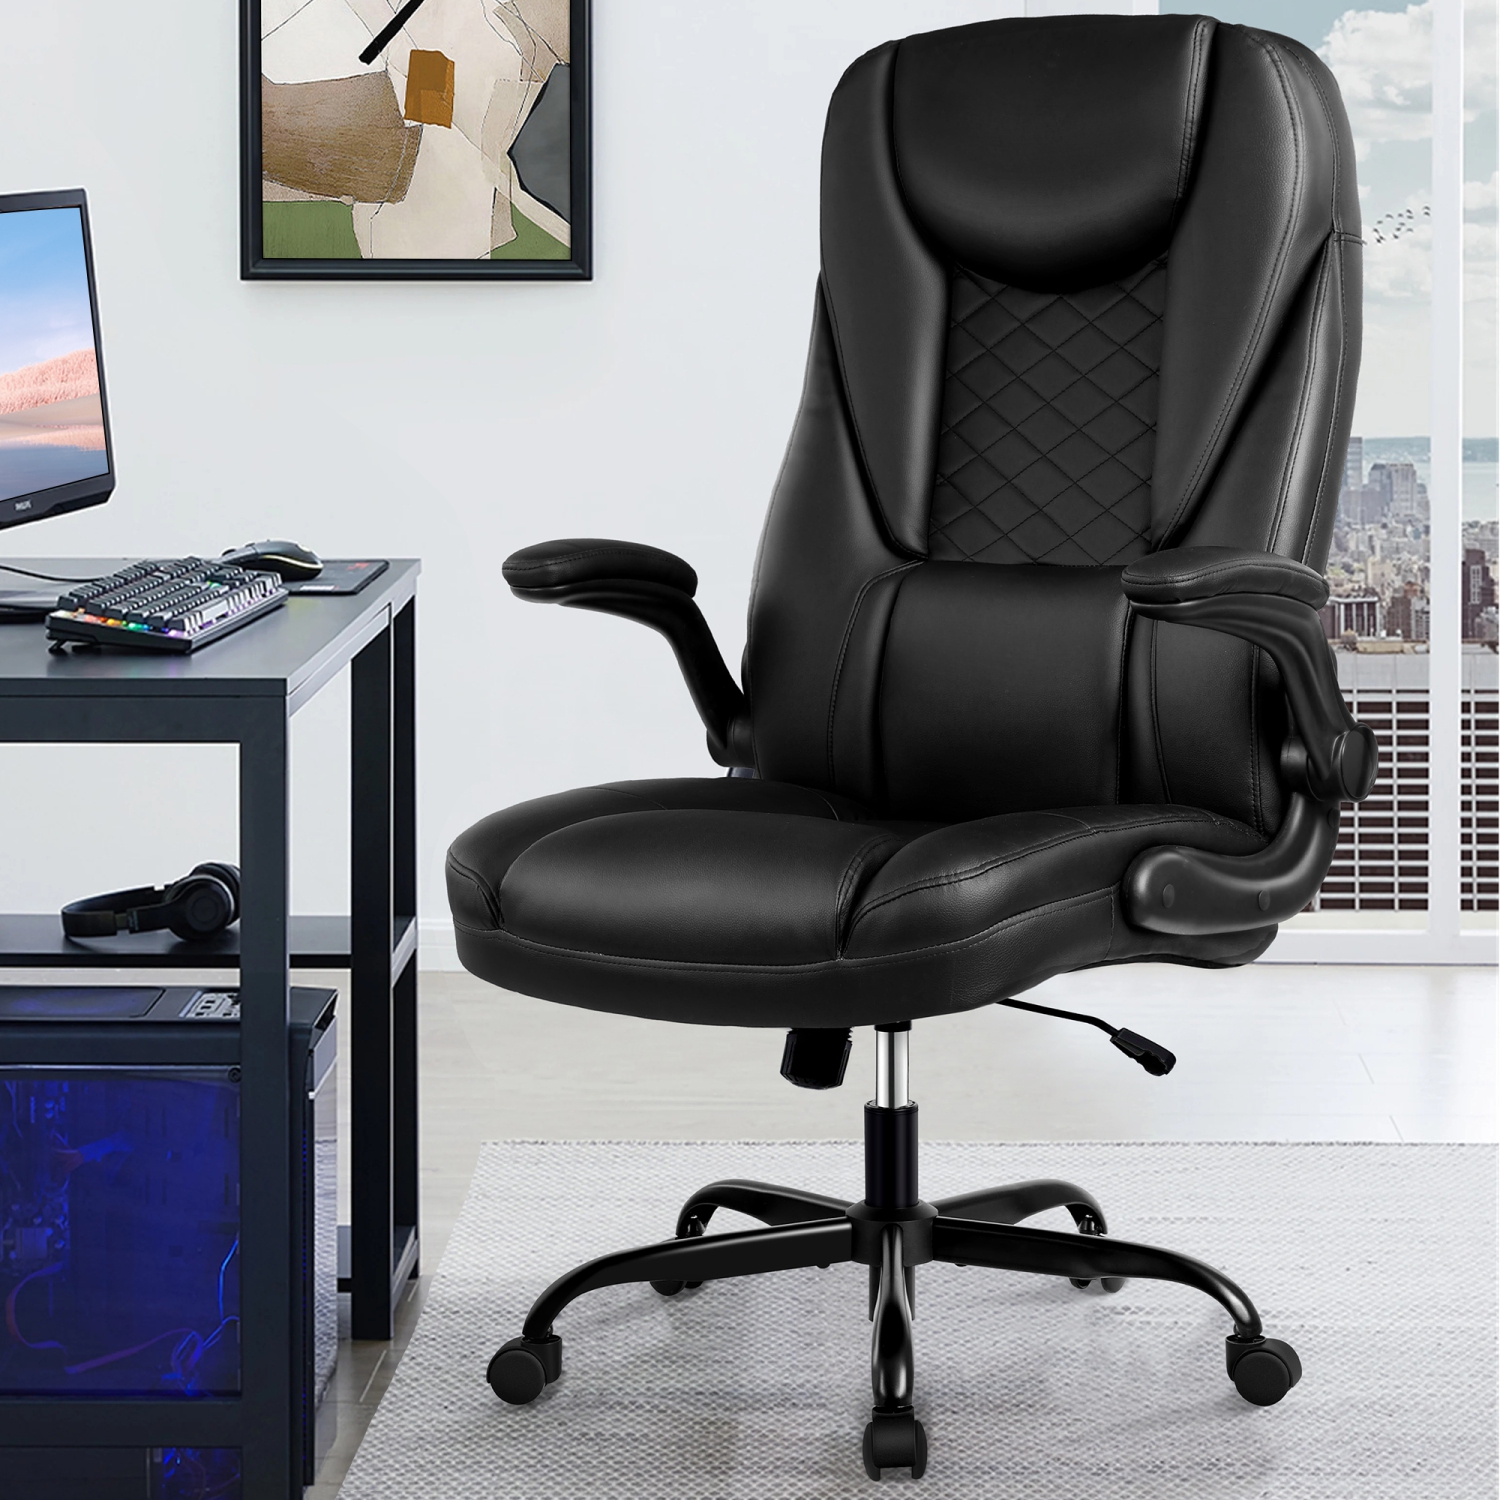 Ergonomic Office Chair, Executive Leather Chair, Big and Tall with